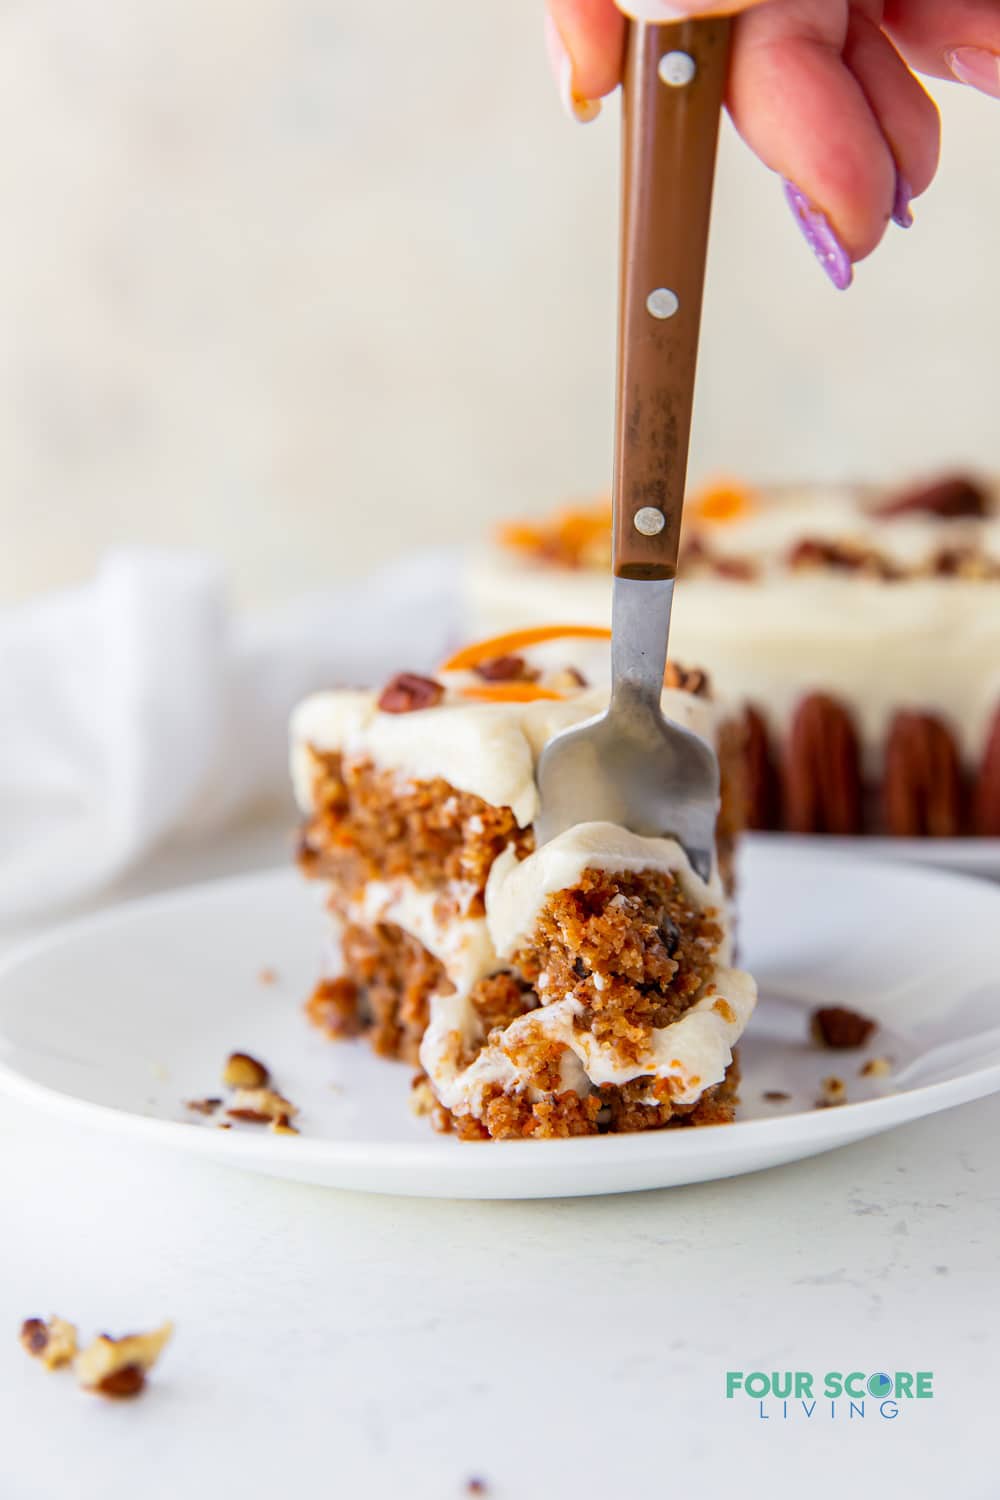 a woman's hand with a fork is taking a bit of carrot cake with cream cheese frosting.